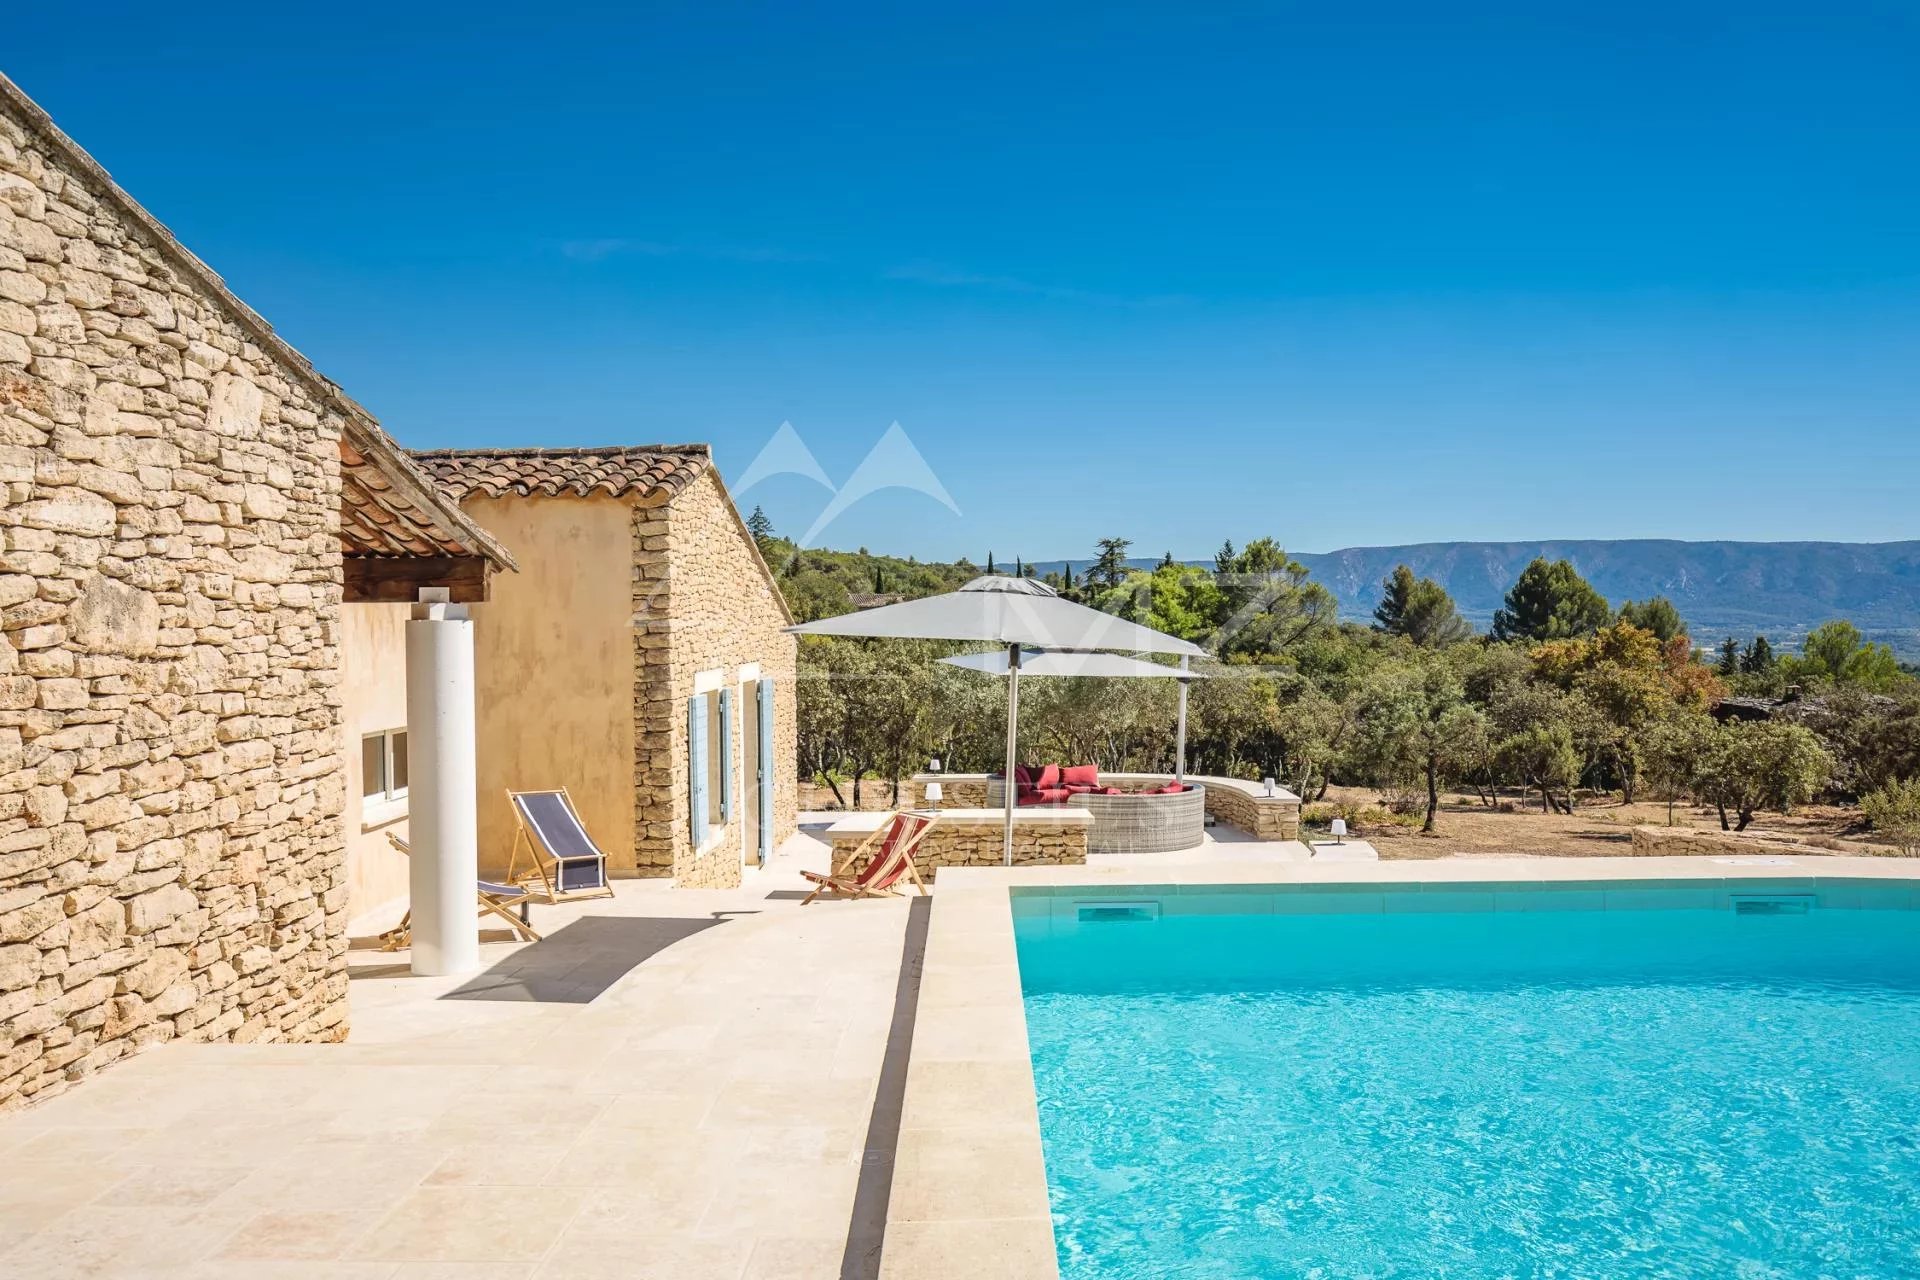 44 / 5 000 Résultats de traduction Gordes - Beautiful holiday home with a view